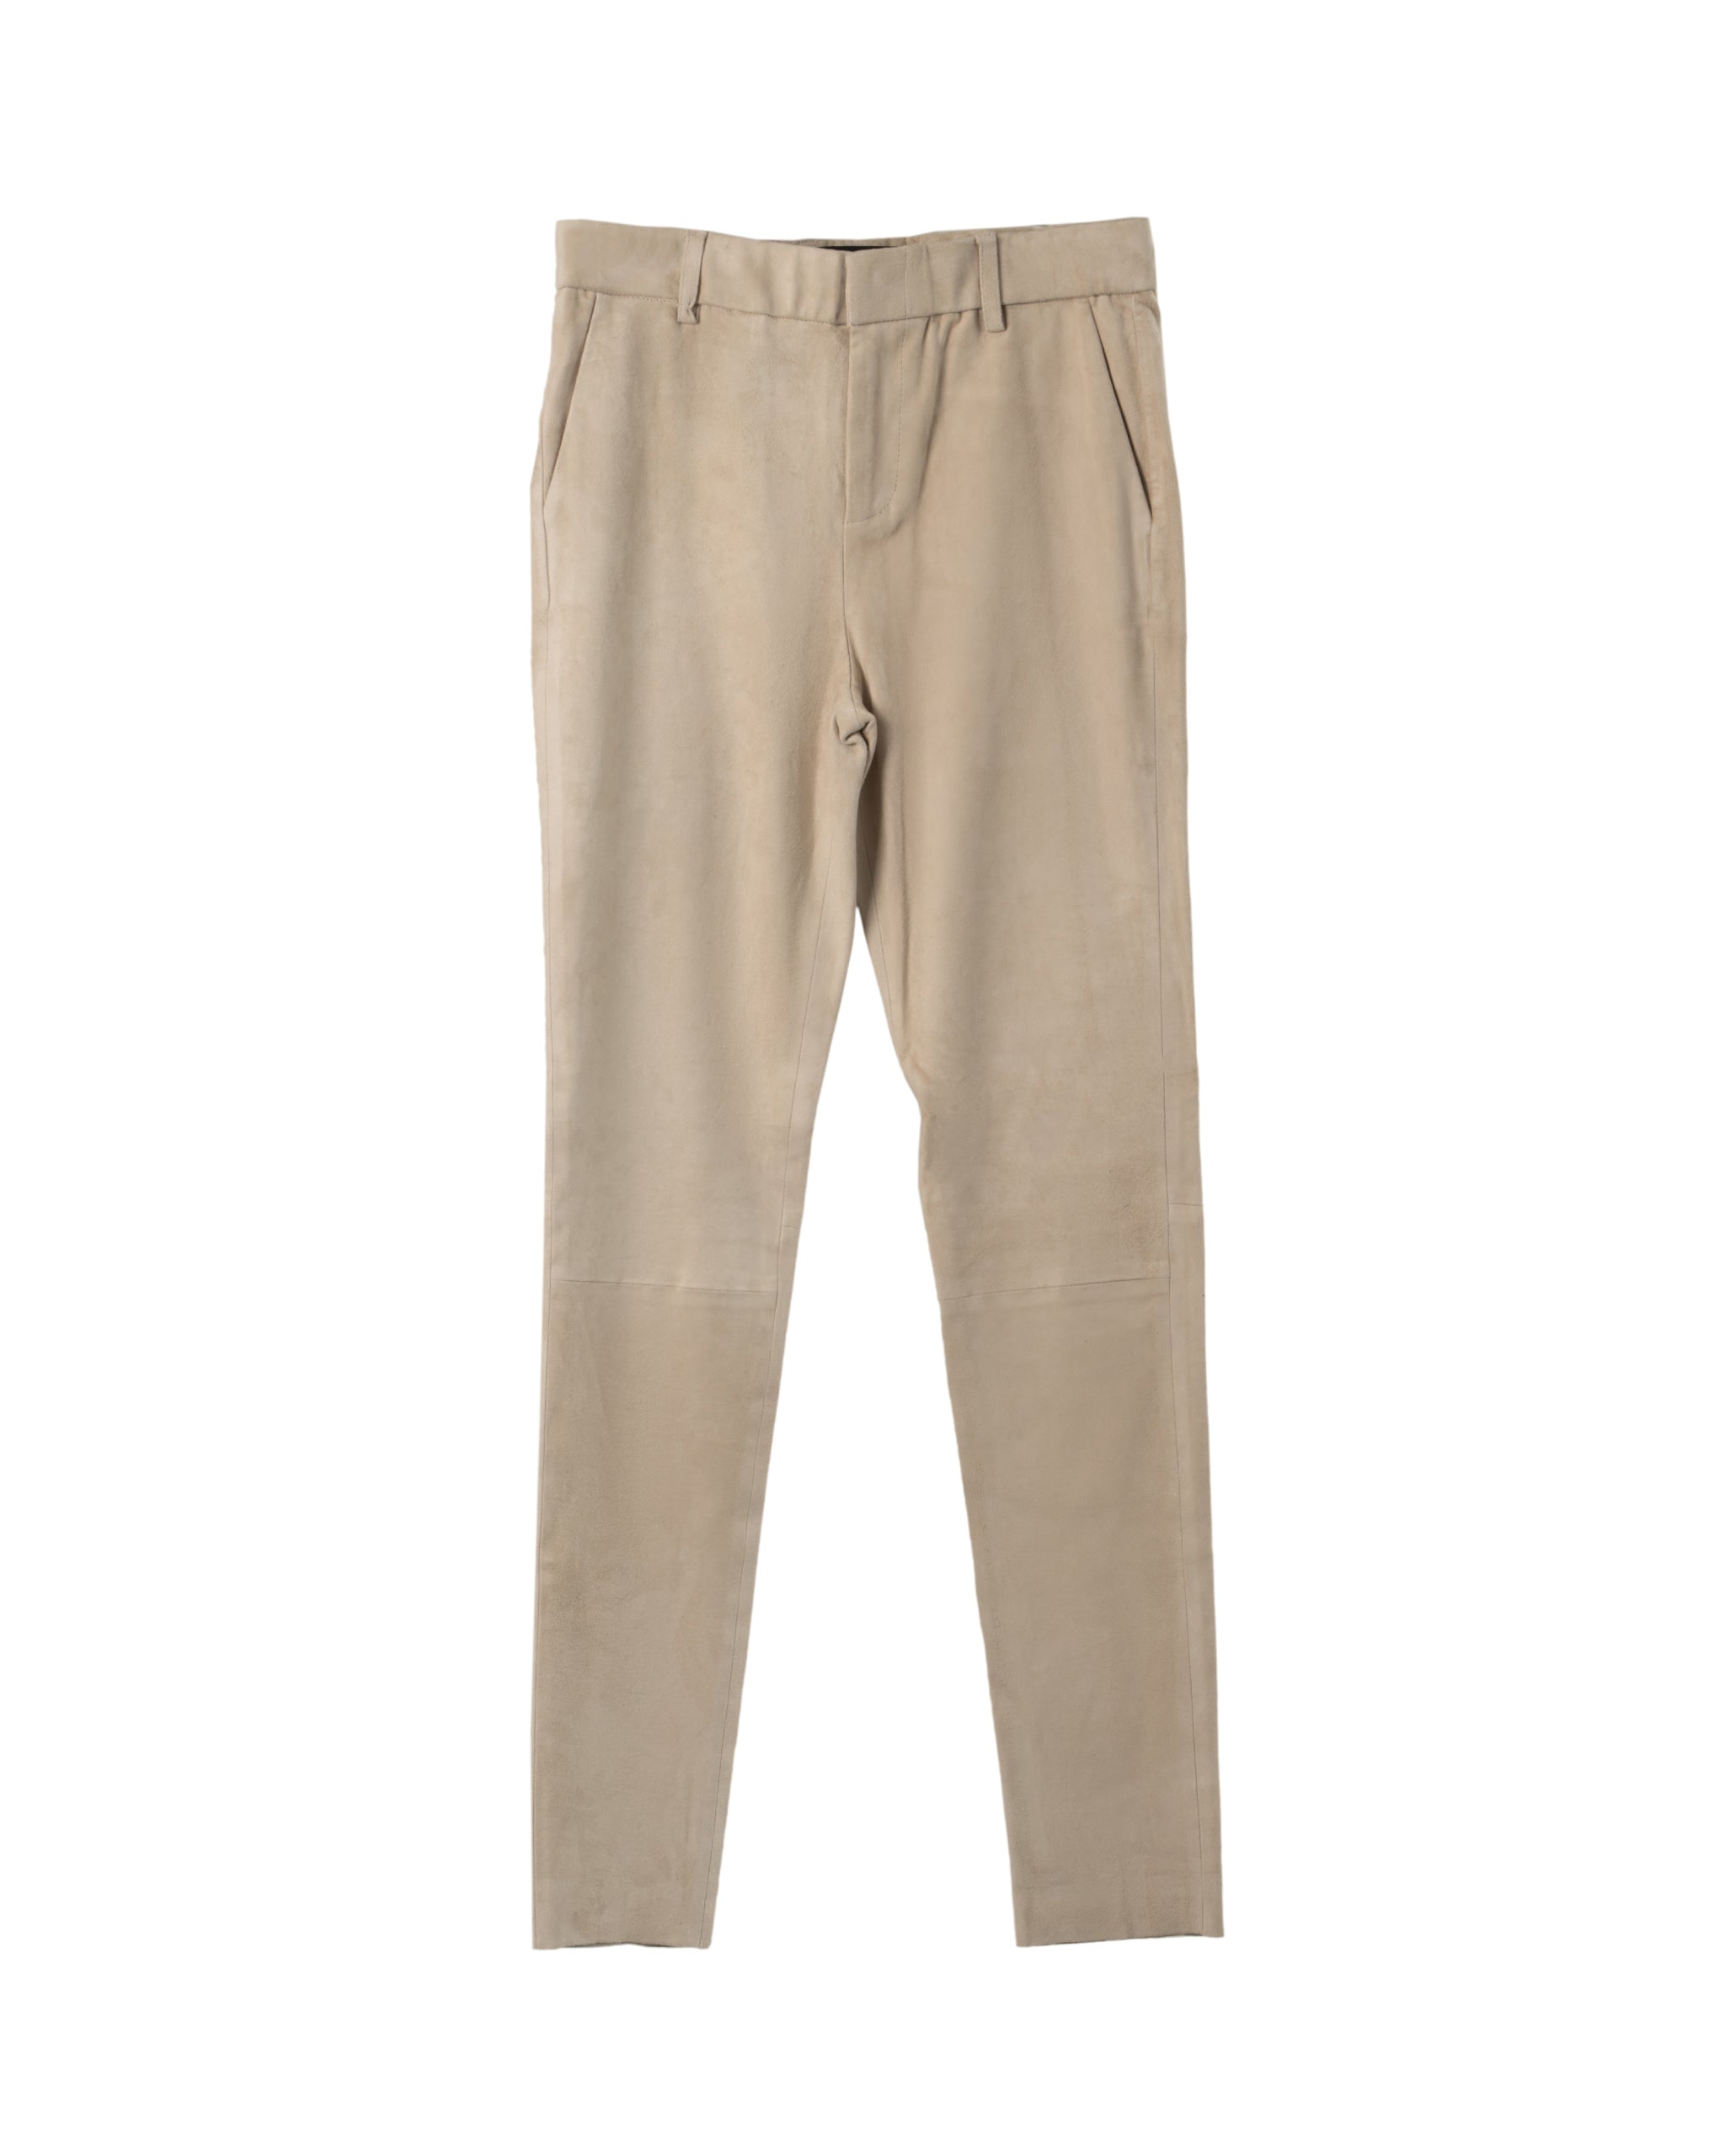 STRETCH LEATHER CHINO PANTS